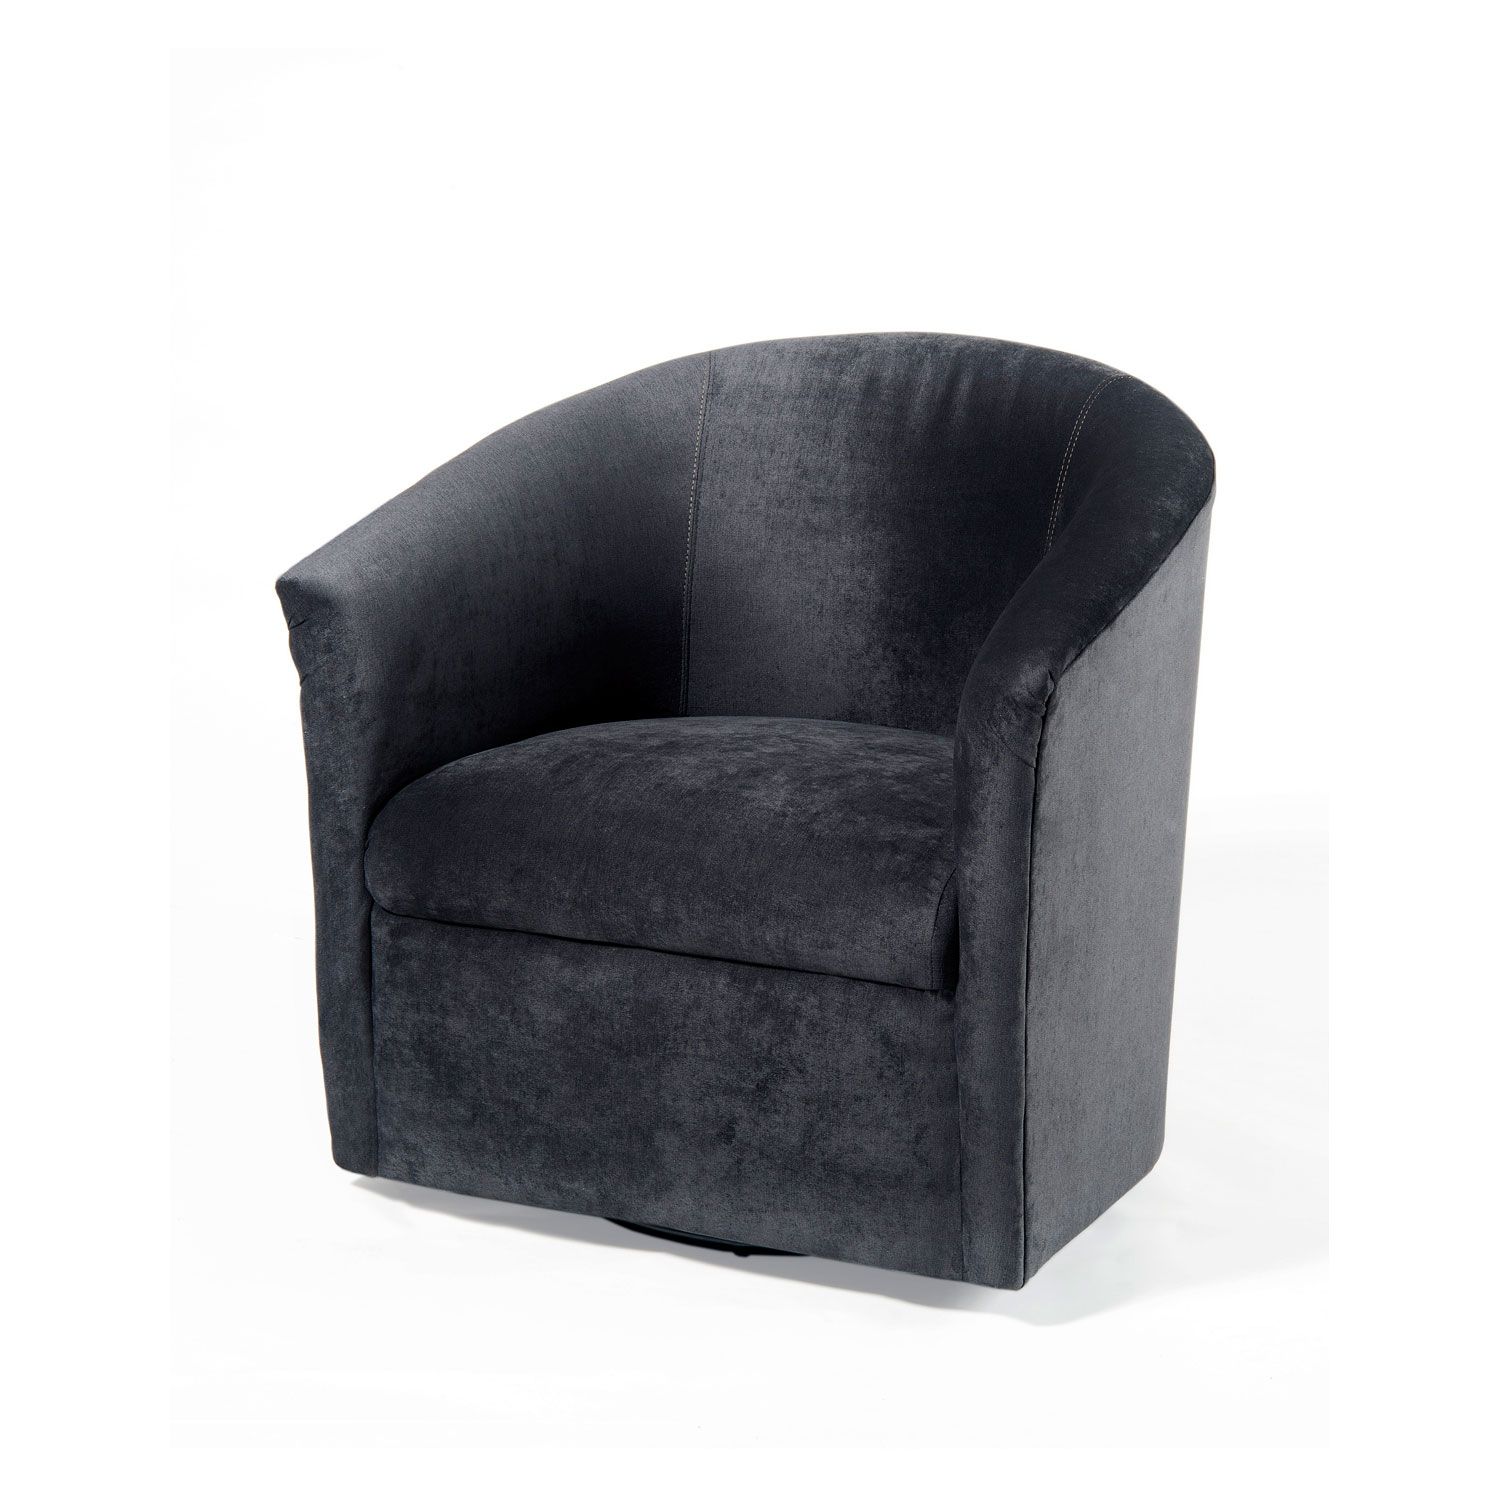 Comfort Pointe Elizabeth Charcoal Swivel Chair 2001 02 | Bellacor Within Charcoal Swivel Chairs (Photo 3 of 20)